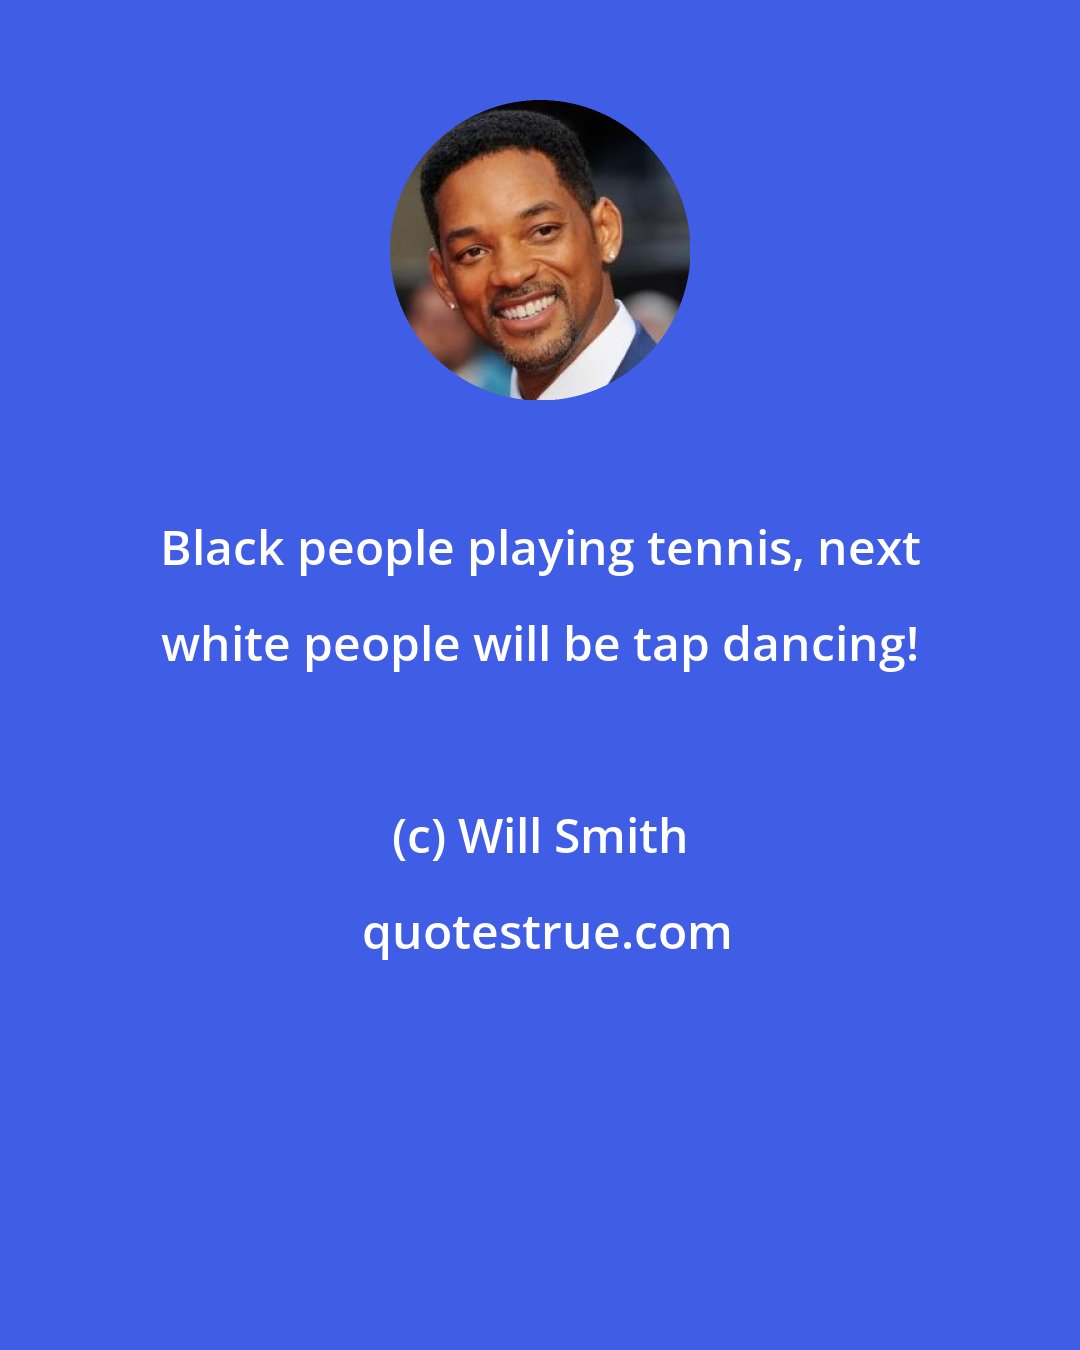 Will Smith: Black people playing tennis, next white people will be tap dancing!